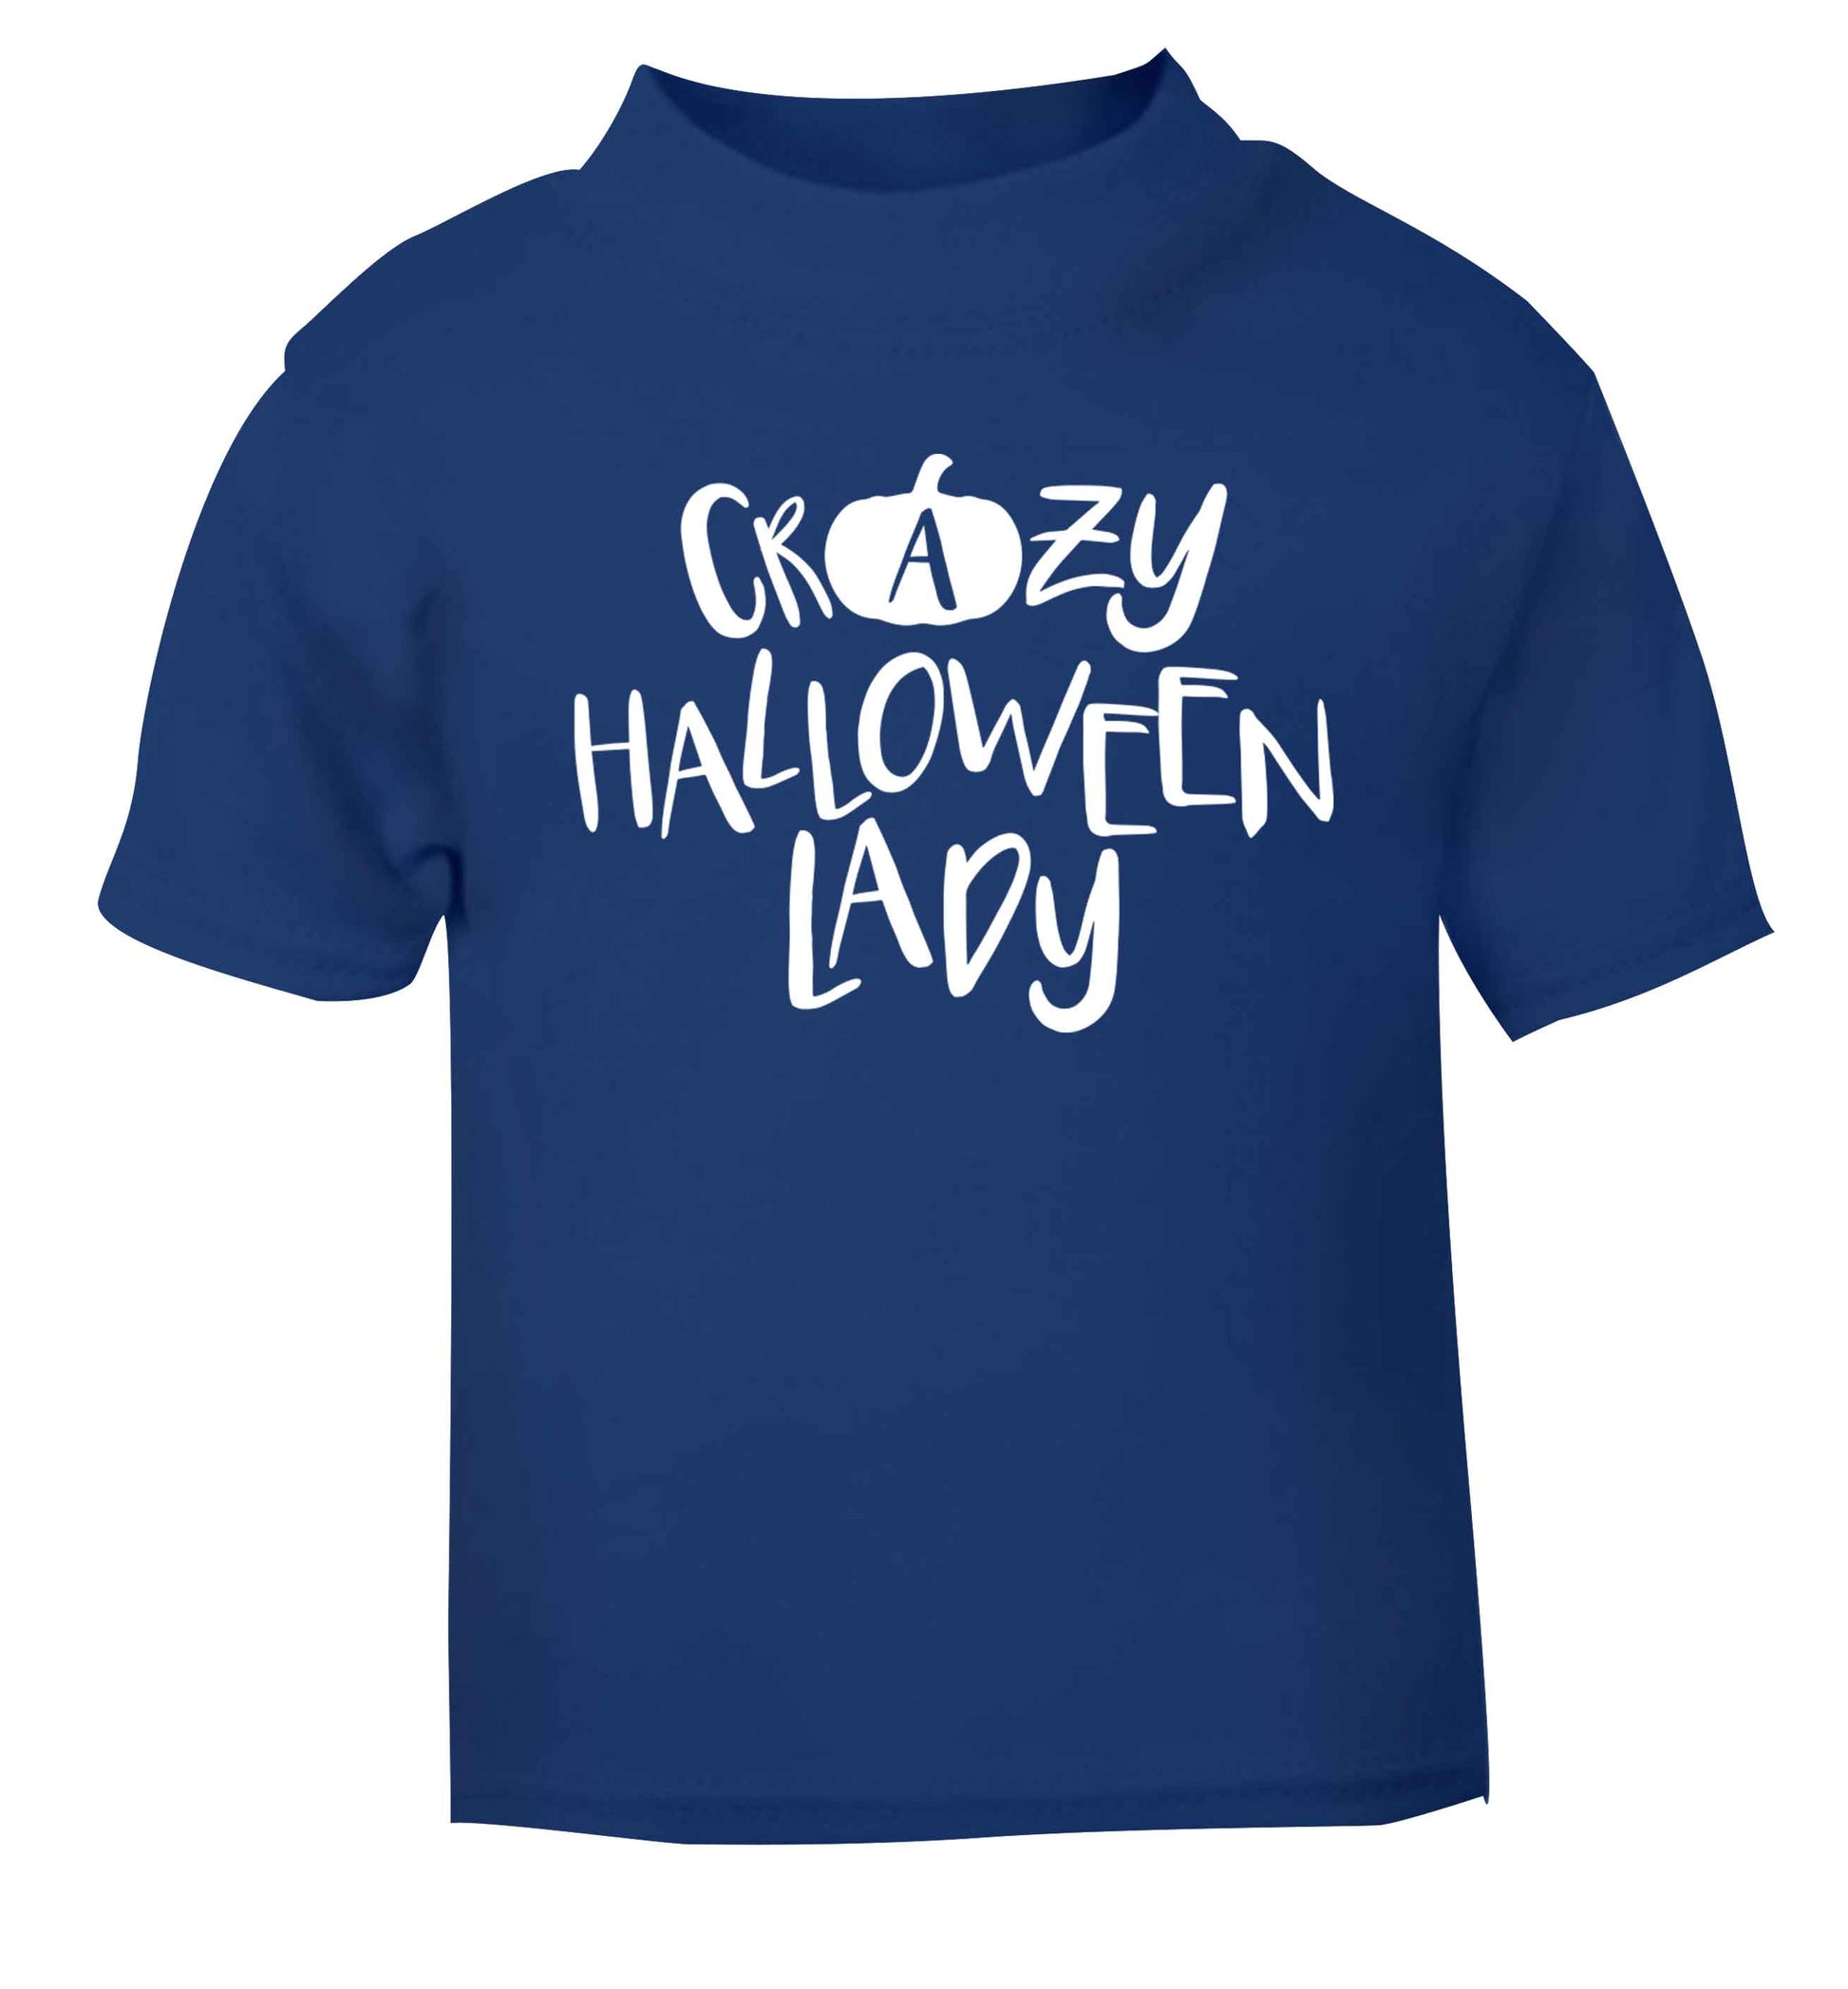 Crazy halloween lady blue baby toddler Tshirt 2 Years